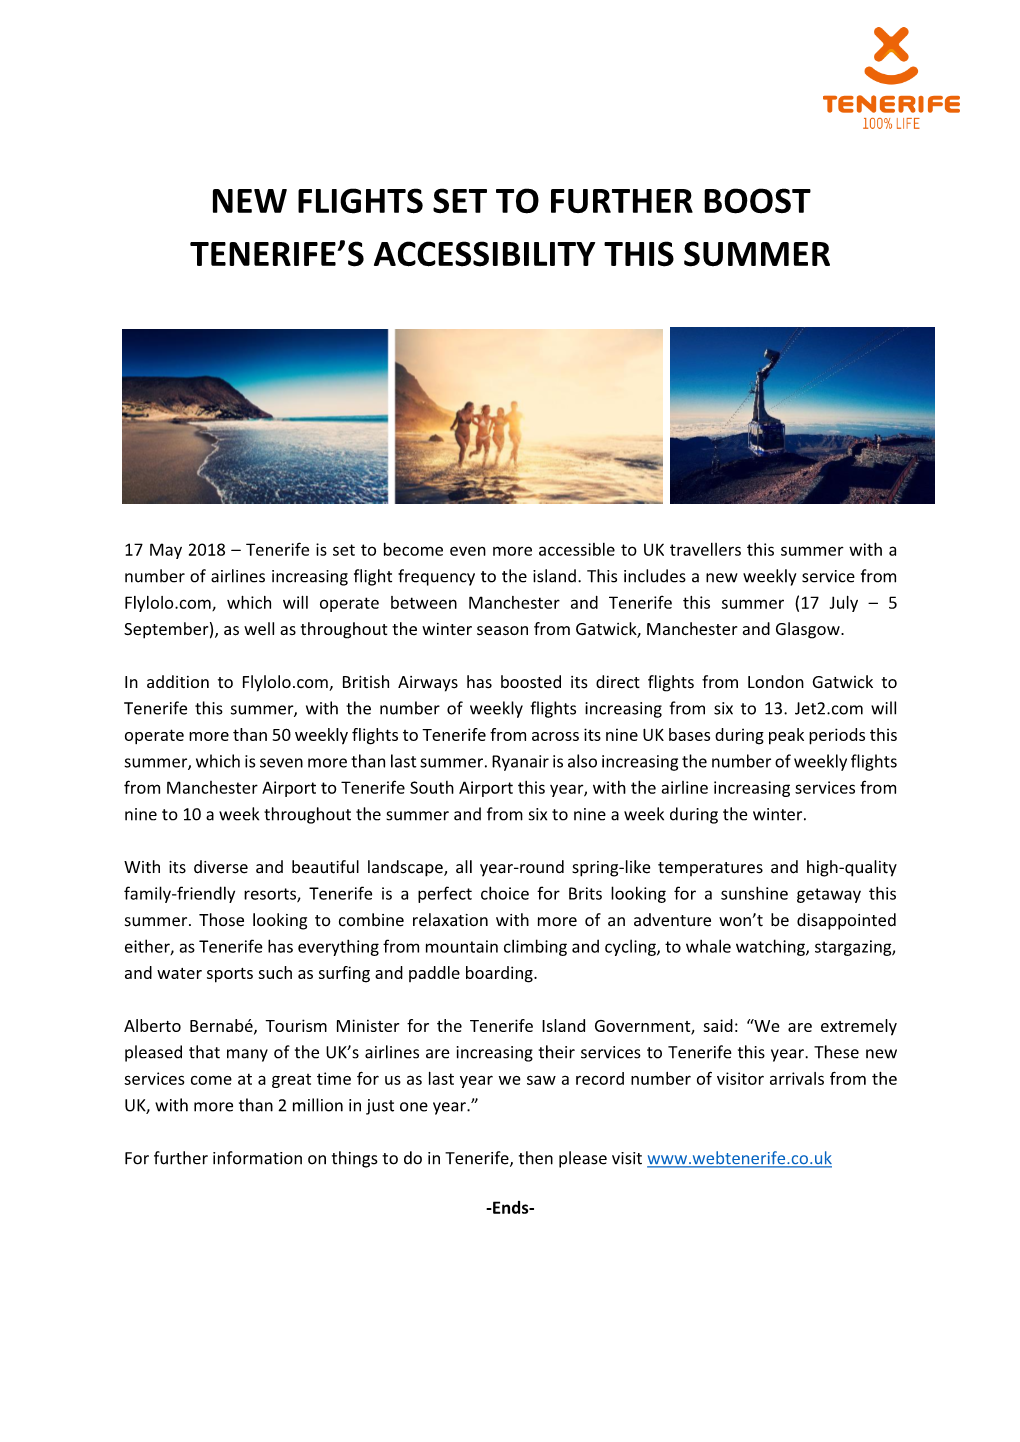 New Flights Set to Further Boost Tenerife’S Accessibility This Summer